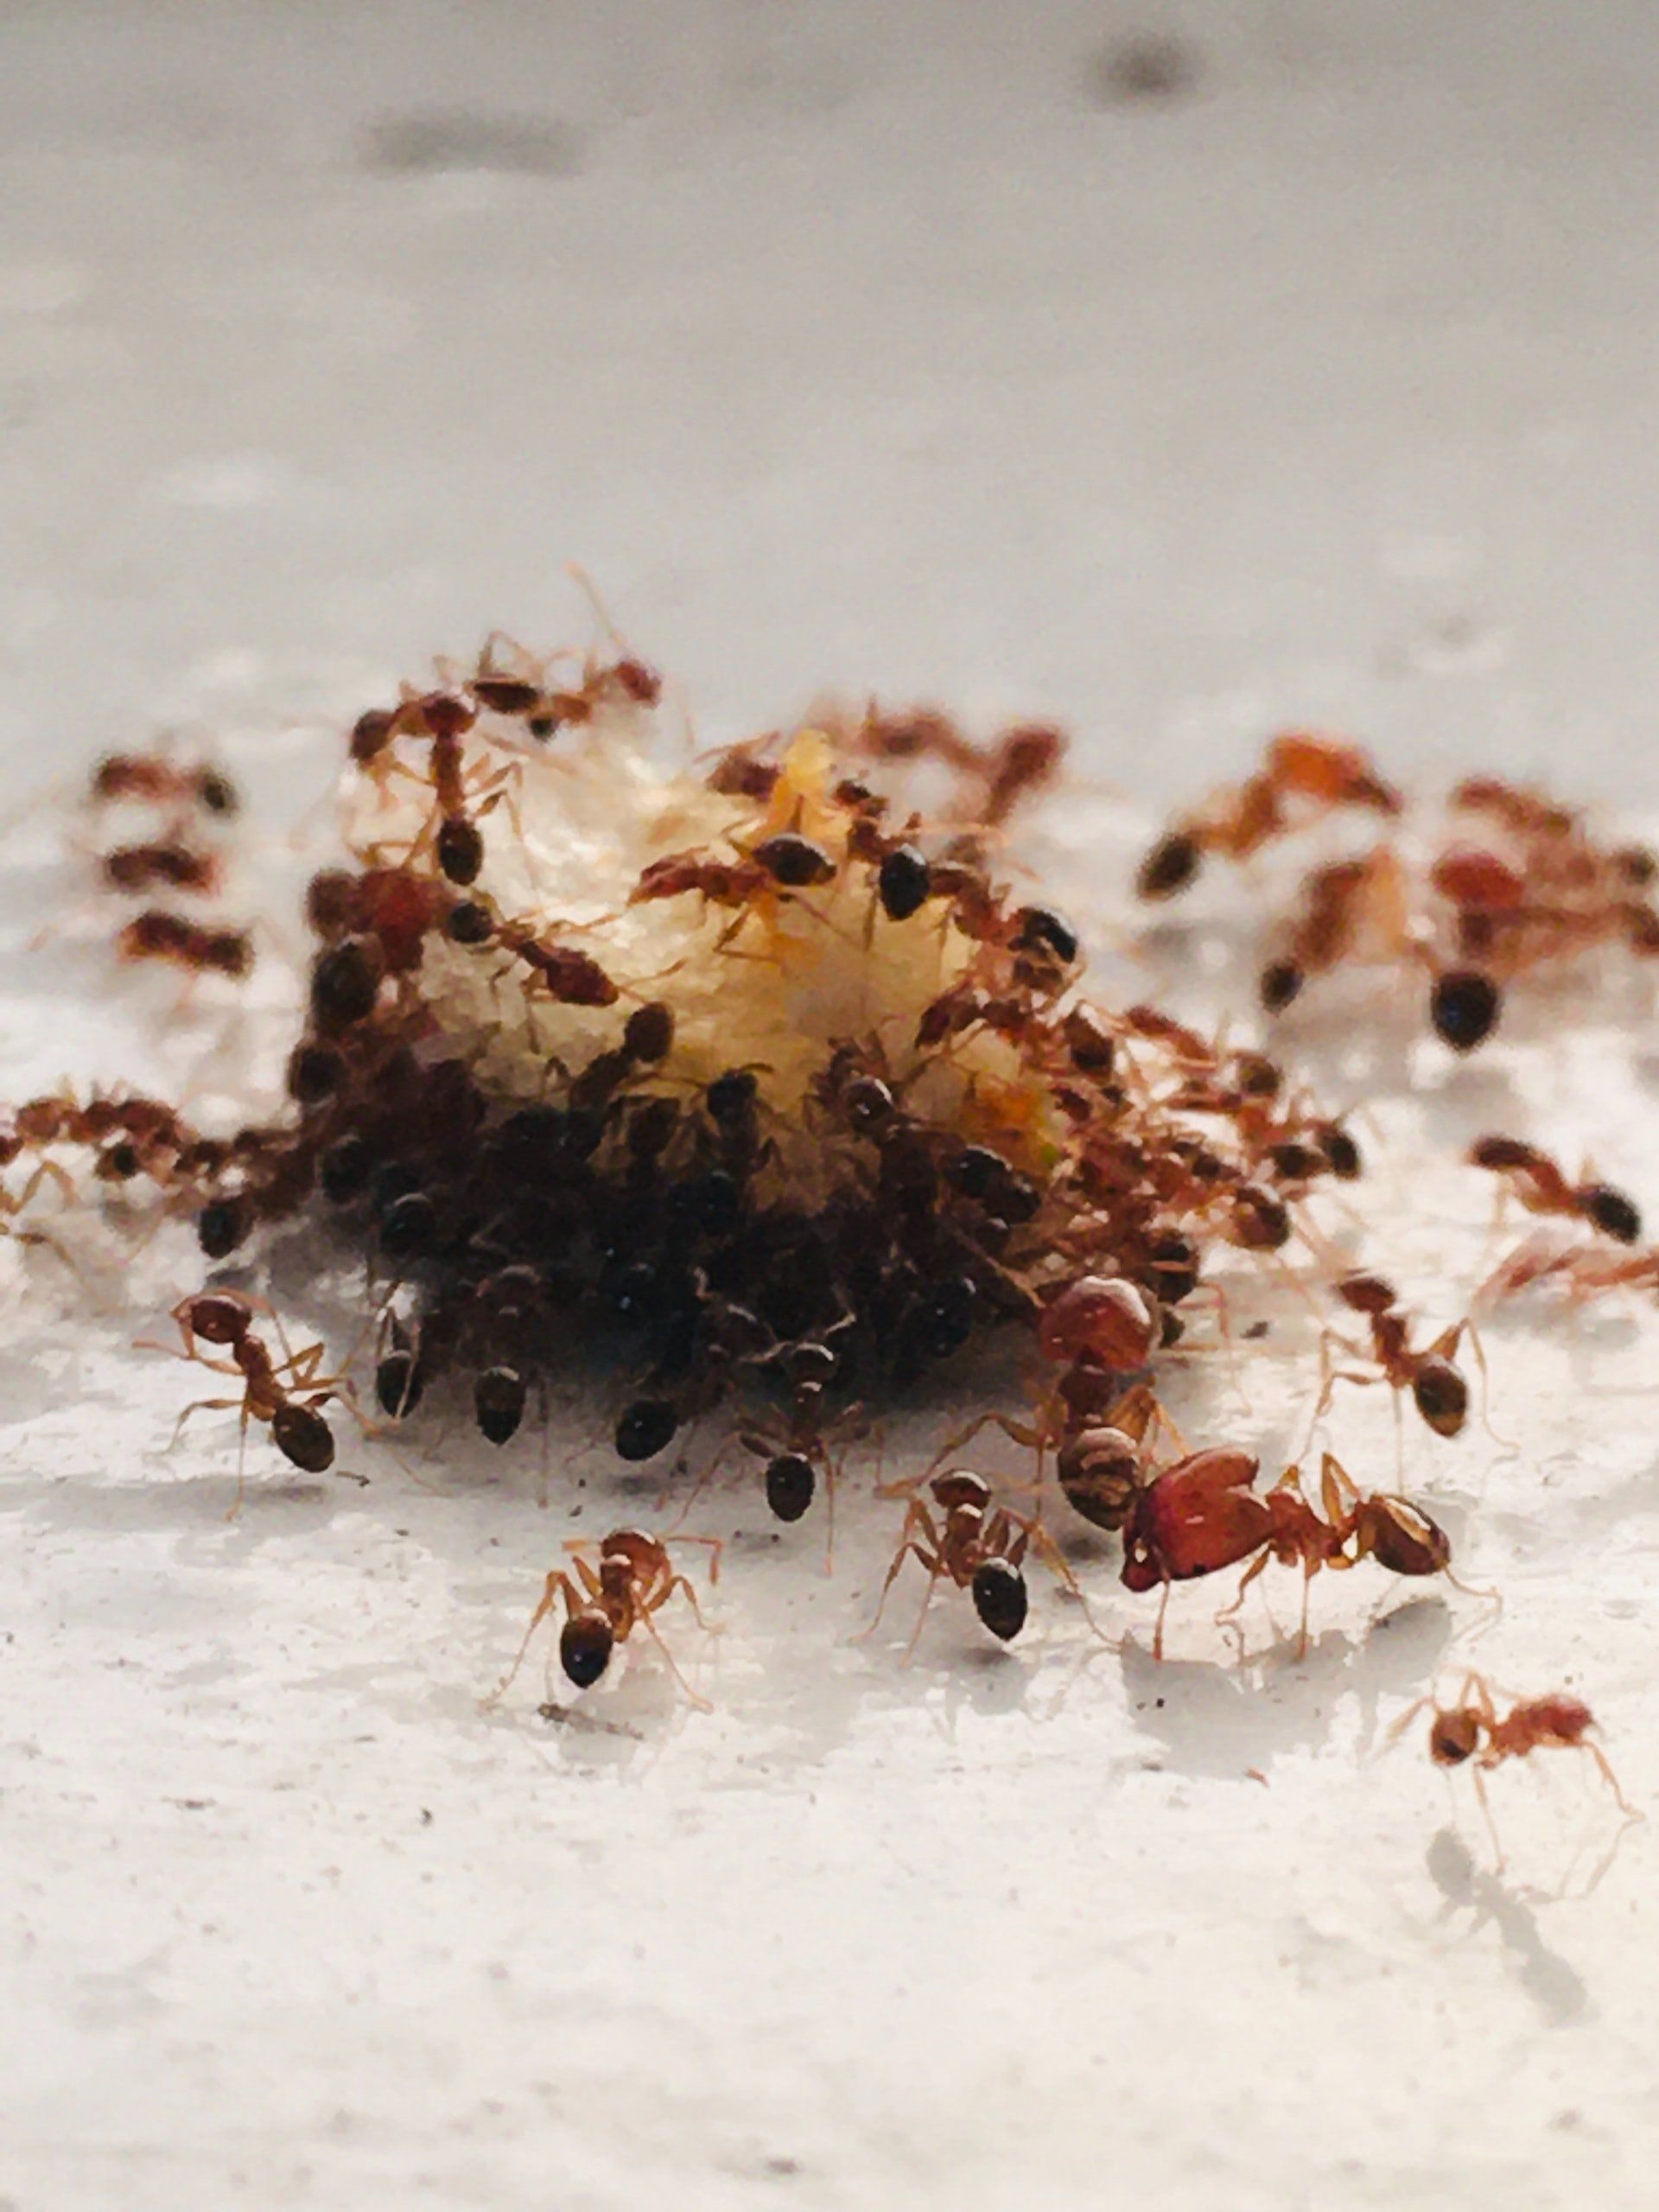 Jet Pest Control Treatment & Removal Services , ants eating